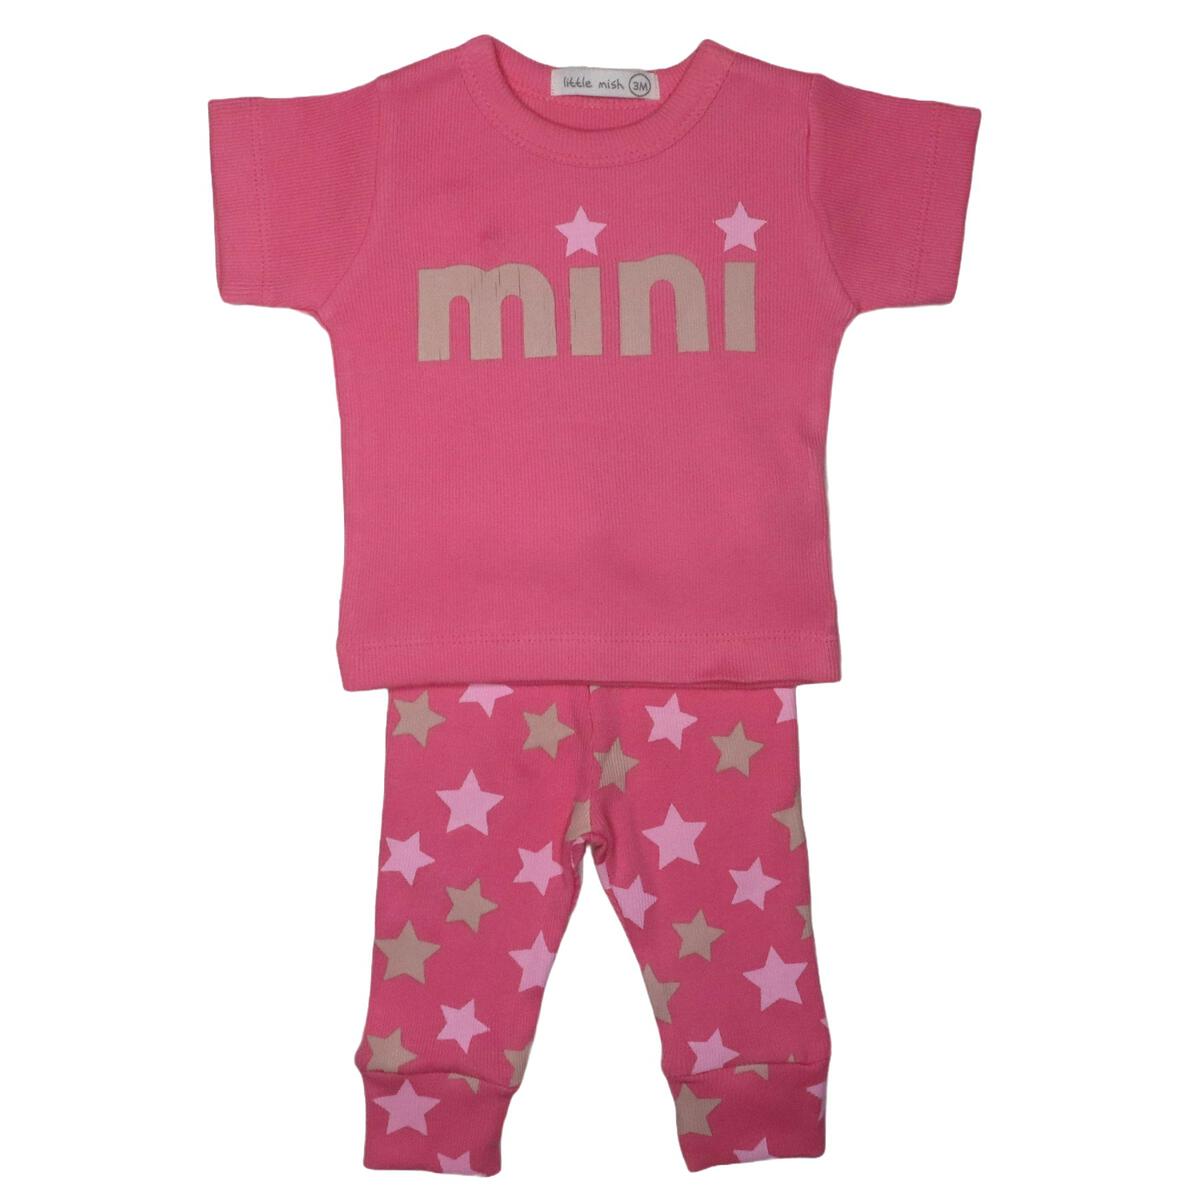 Ribbed Pink Star Tee & Pant Set - Twinkle Twinkle Little One